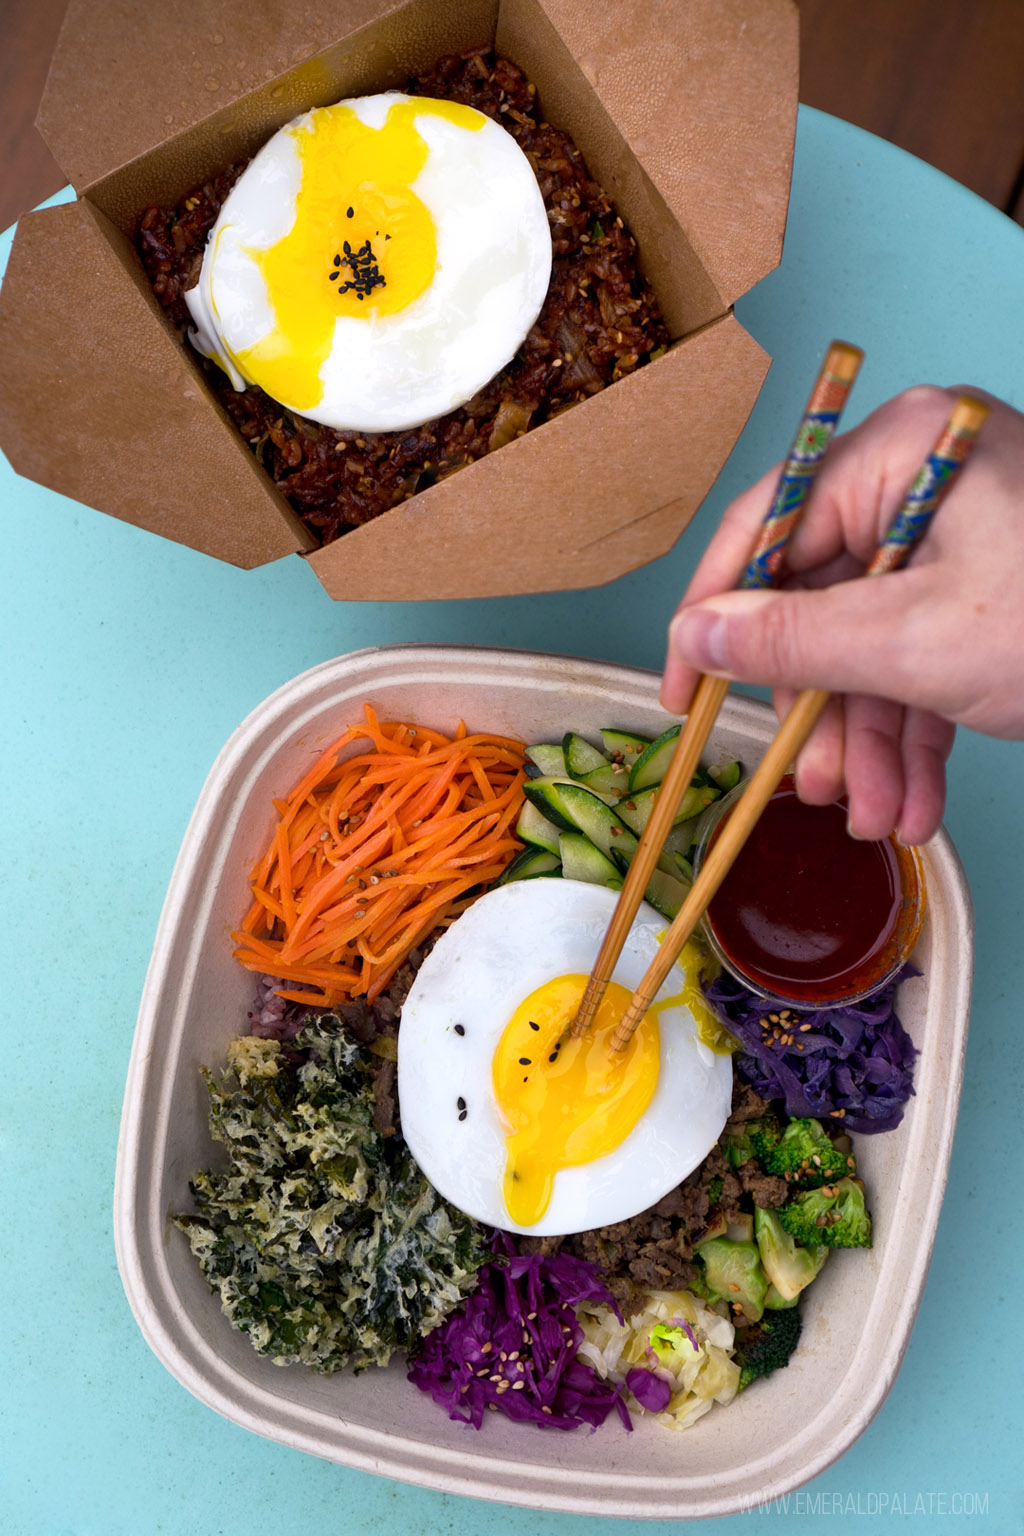 Korean food in takeout containers from one of the best Seattle takeout restaurants